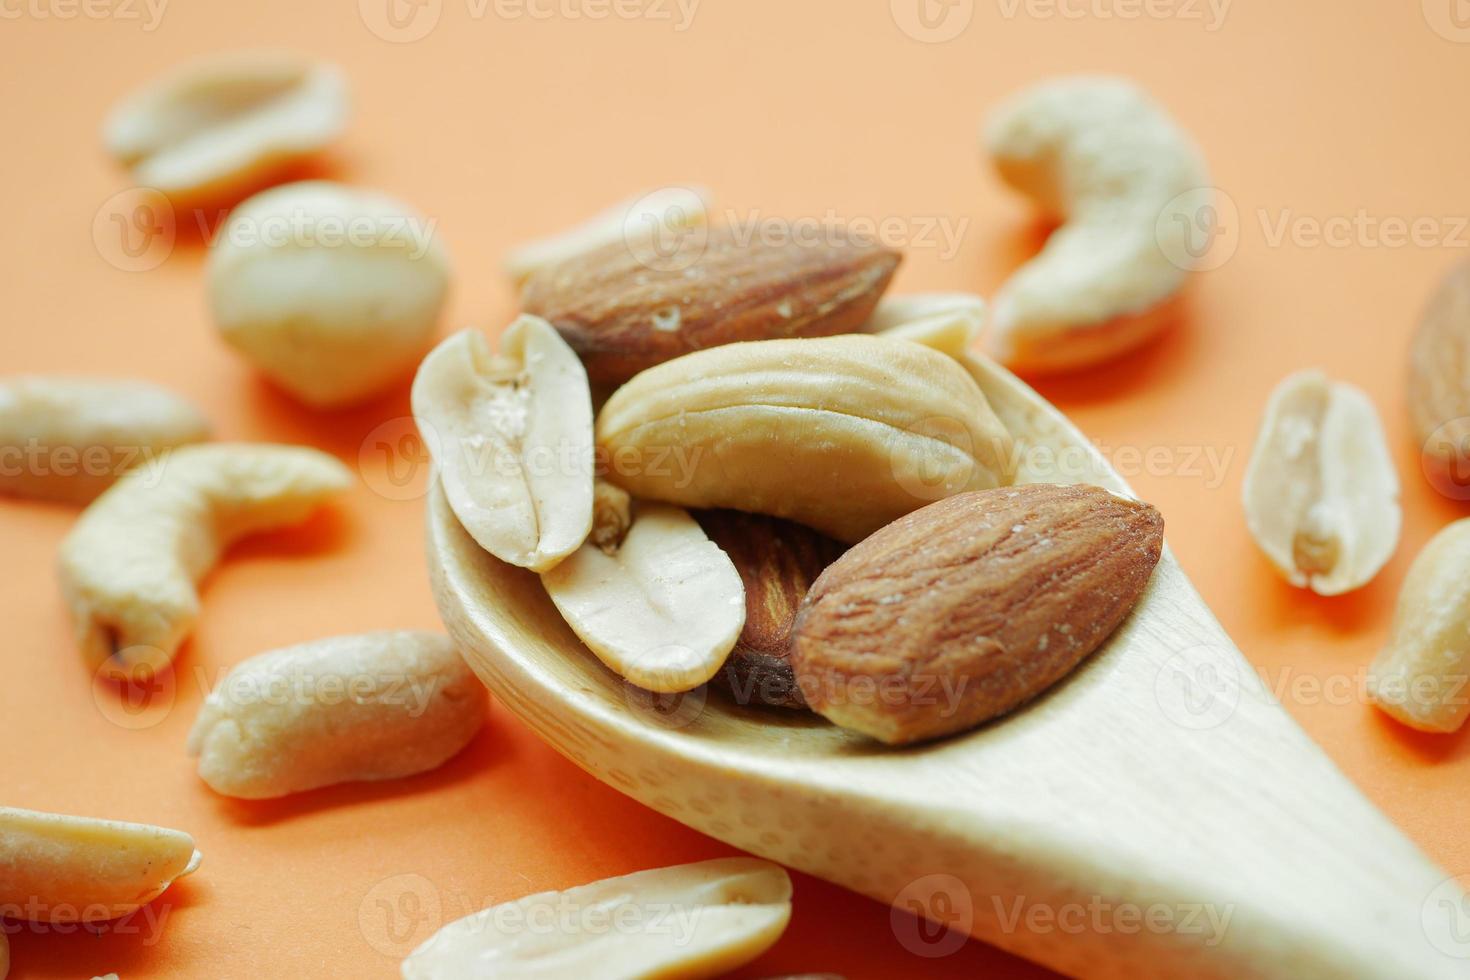 almond and cashew nuts on wooden spoon photo